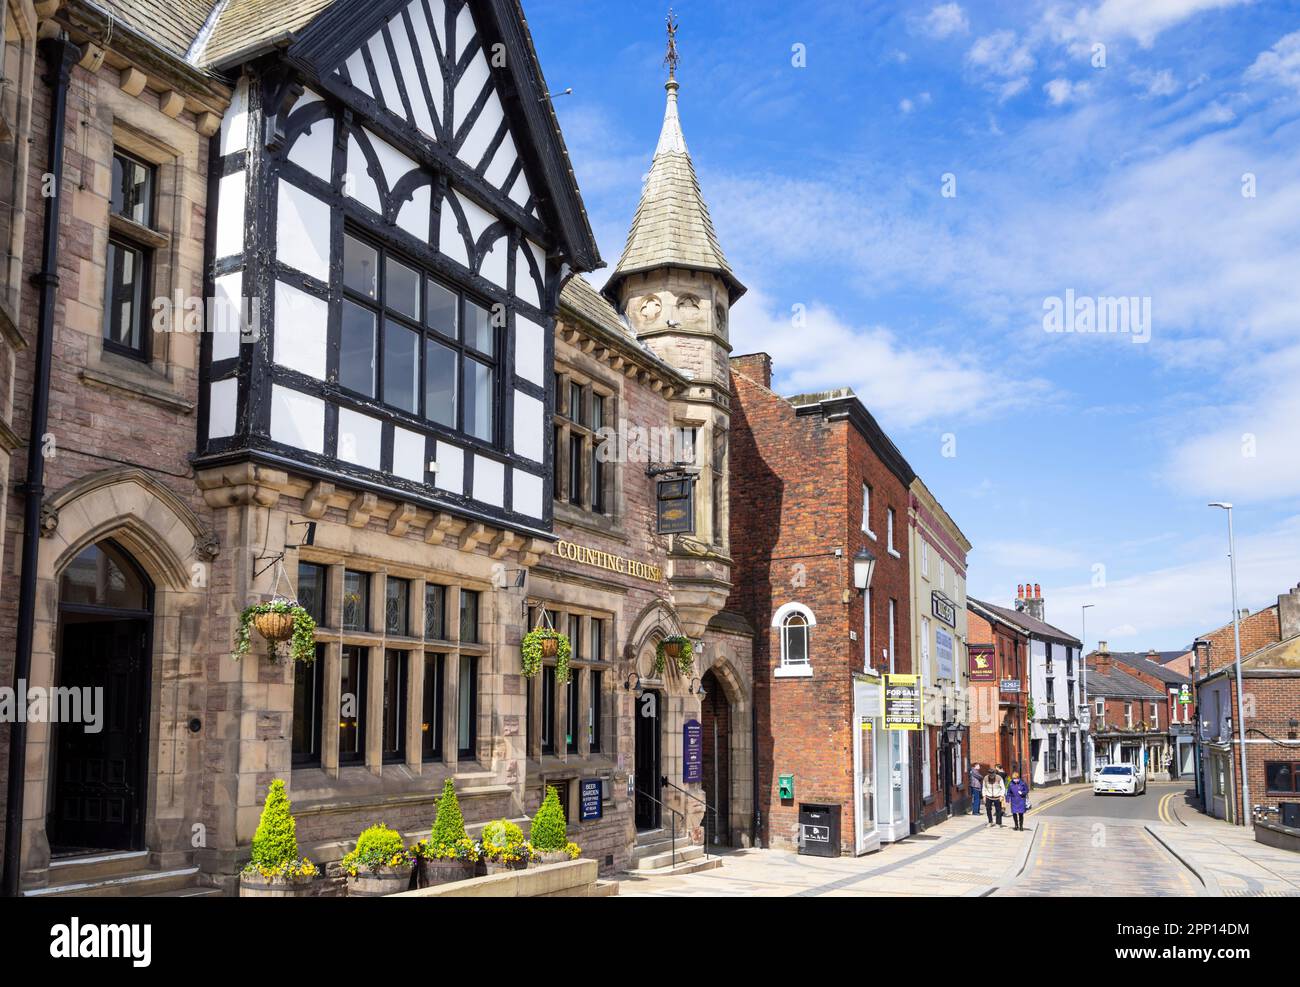 Congleton The Counting House - JD Wetherspoon pub on Swan bank Congleton town centre Congleton Cheshire East England UK GB Europe Stock Photo